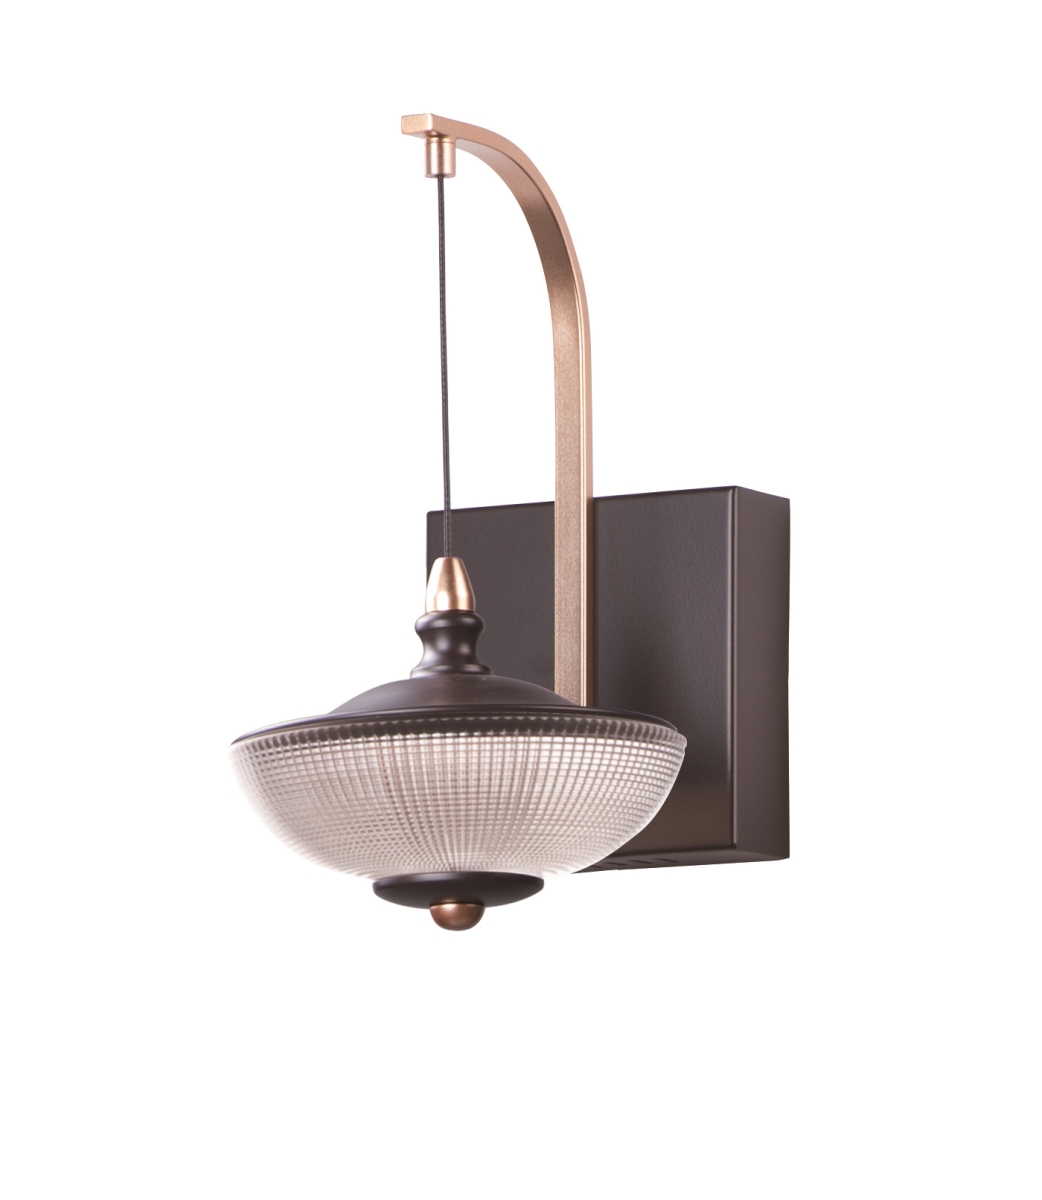 E23159-126brzgld 8 In. Bella Led Wall Sconce Light, Bronze & Gold